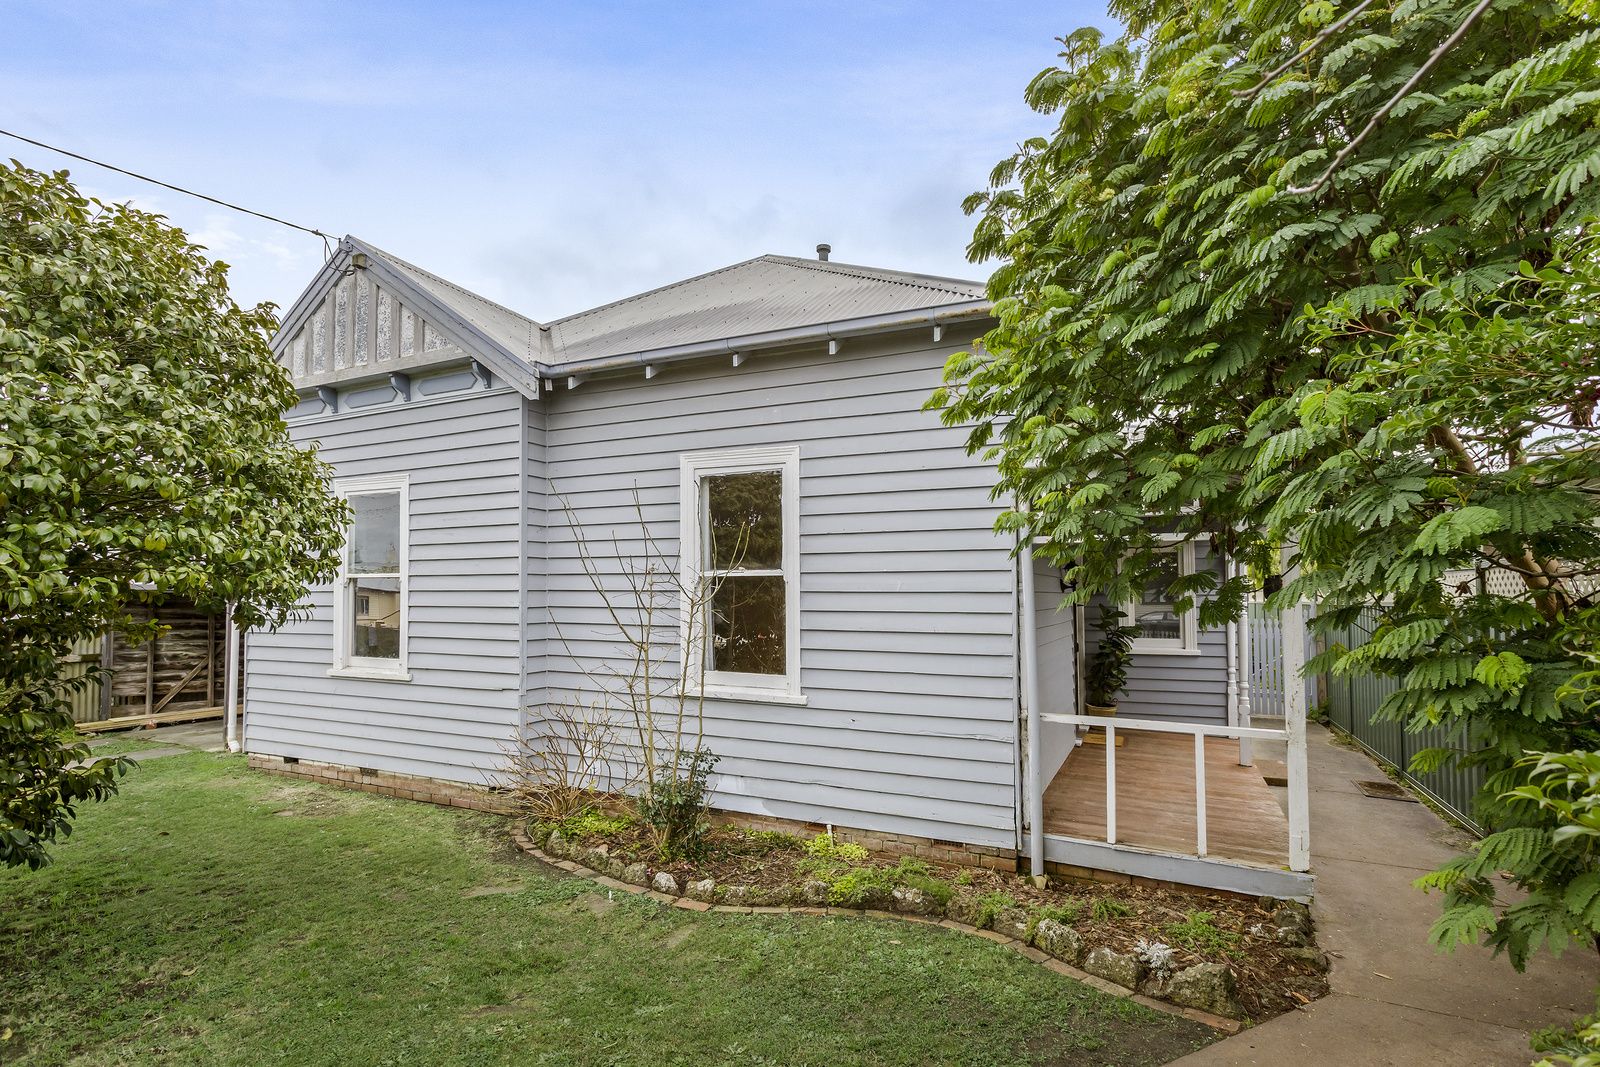 17 Marks Street, Colac VIC 3250, Image 0